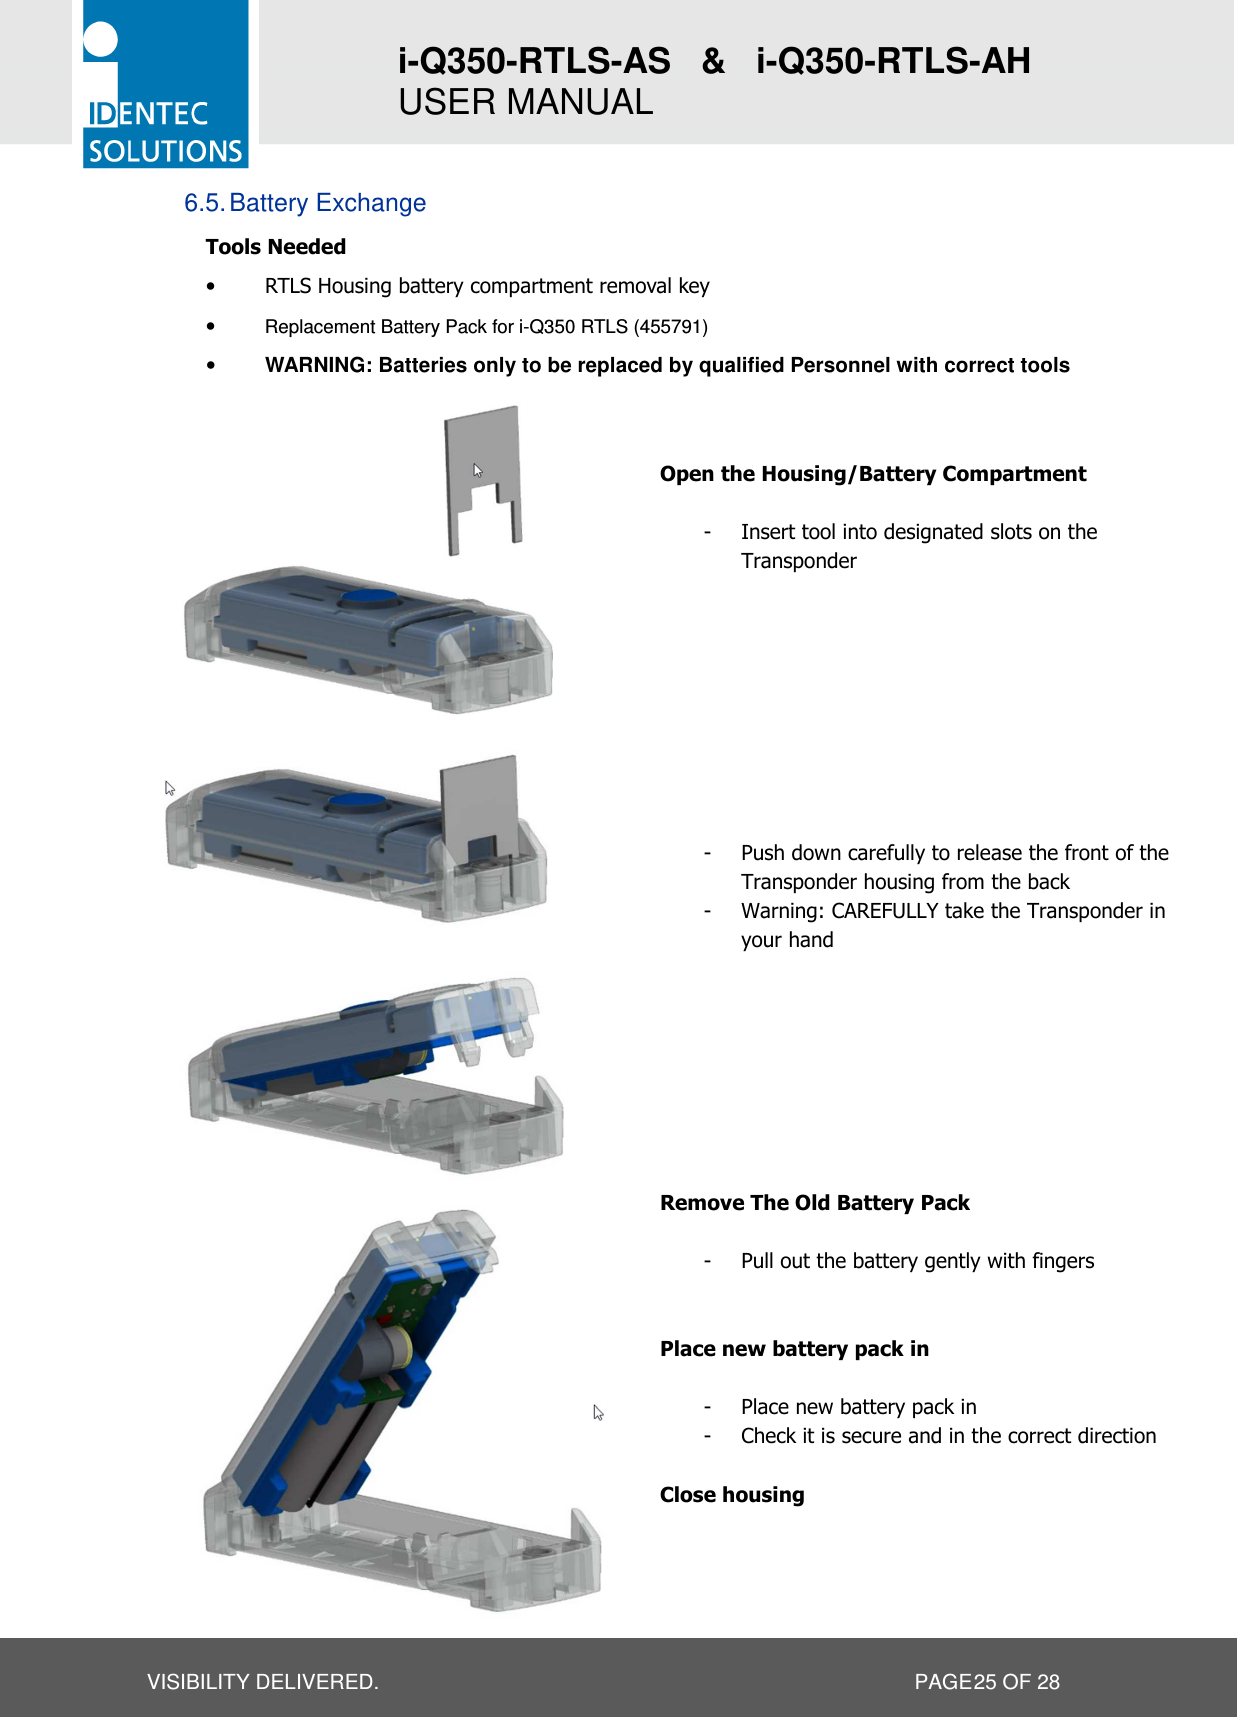 i-Q350-RTLS-AS   &amp;   i-Q350-RTLS-AH   USER MANUAL  VISIBILITY DELIVERED.                   PAGE 25 OF 28 6.5. Battery Exchange Tools Needed • RTLS Housing battery compartment removal key • Replacement Battery Pack for i-Q350 RTLS (455791) • WARNING: Batteries only to be replaced by qualified Personnel with correct tools                       Open the Housing/Battery Compartment  - Insert tool into designated slots on the Transponder          - Push down carefully to release the front of the Transponder housing from the back - Warning: CAREFULLY take the Transponder in your hand         Remove The Old Battery Pack  - Pull out the battery gently with fingers   Place new battery pack in  - Place new battery pack in - Check it is secure and in the correct direction  Close housing    